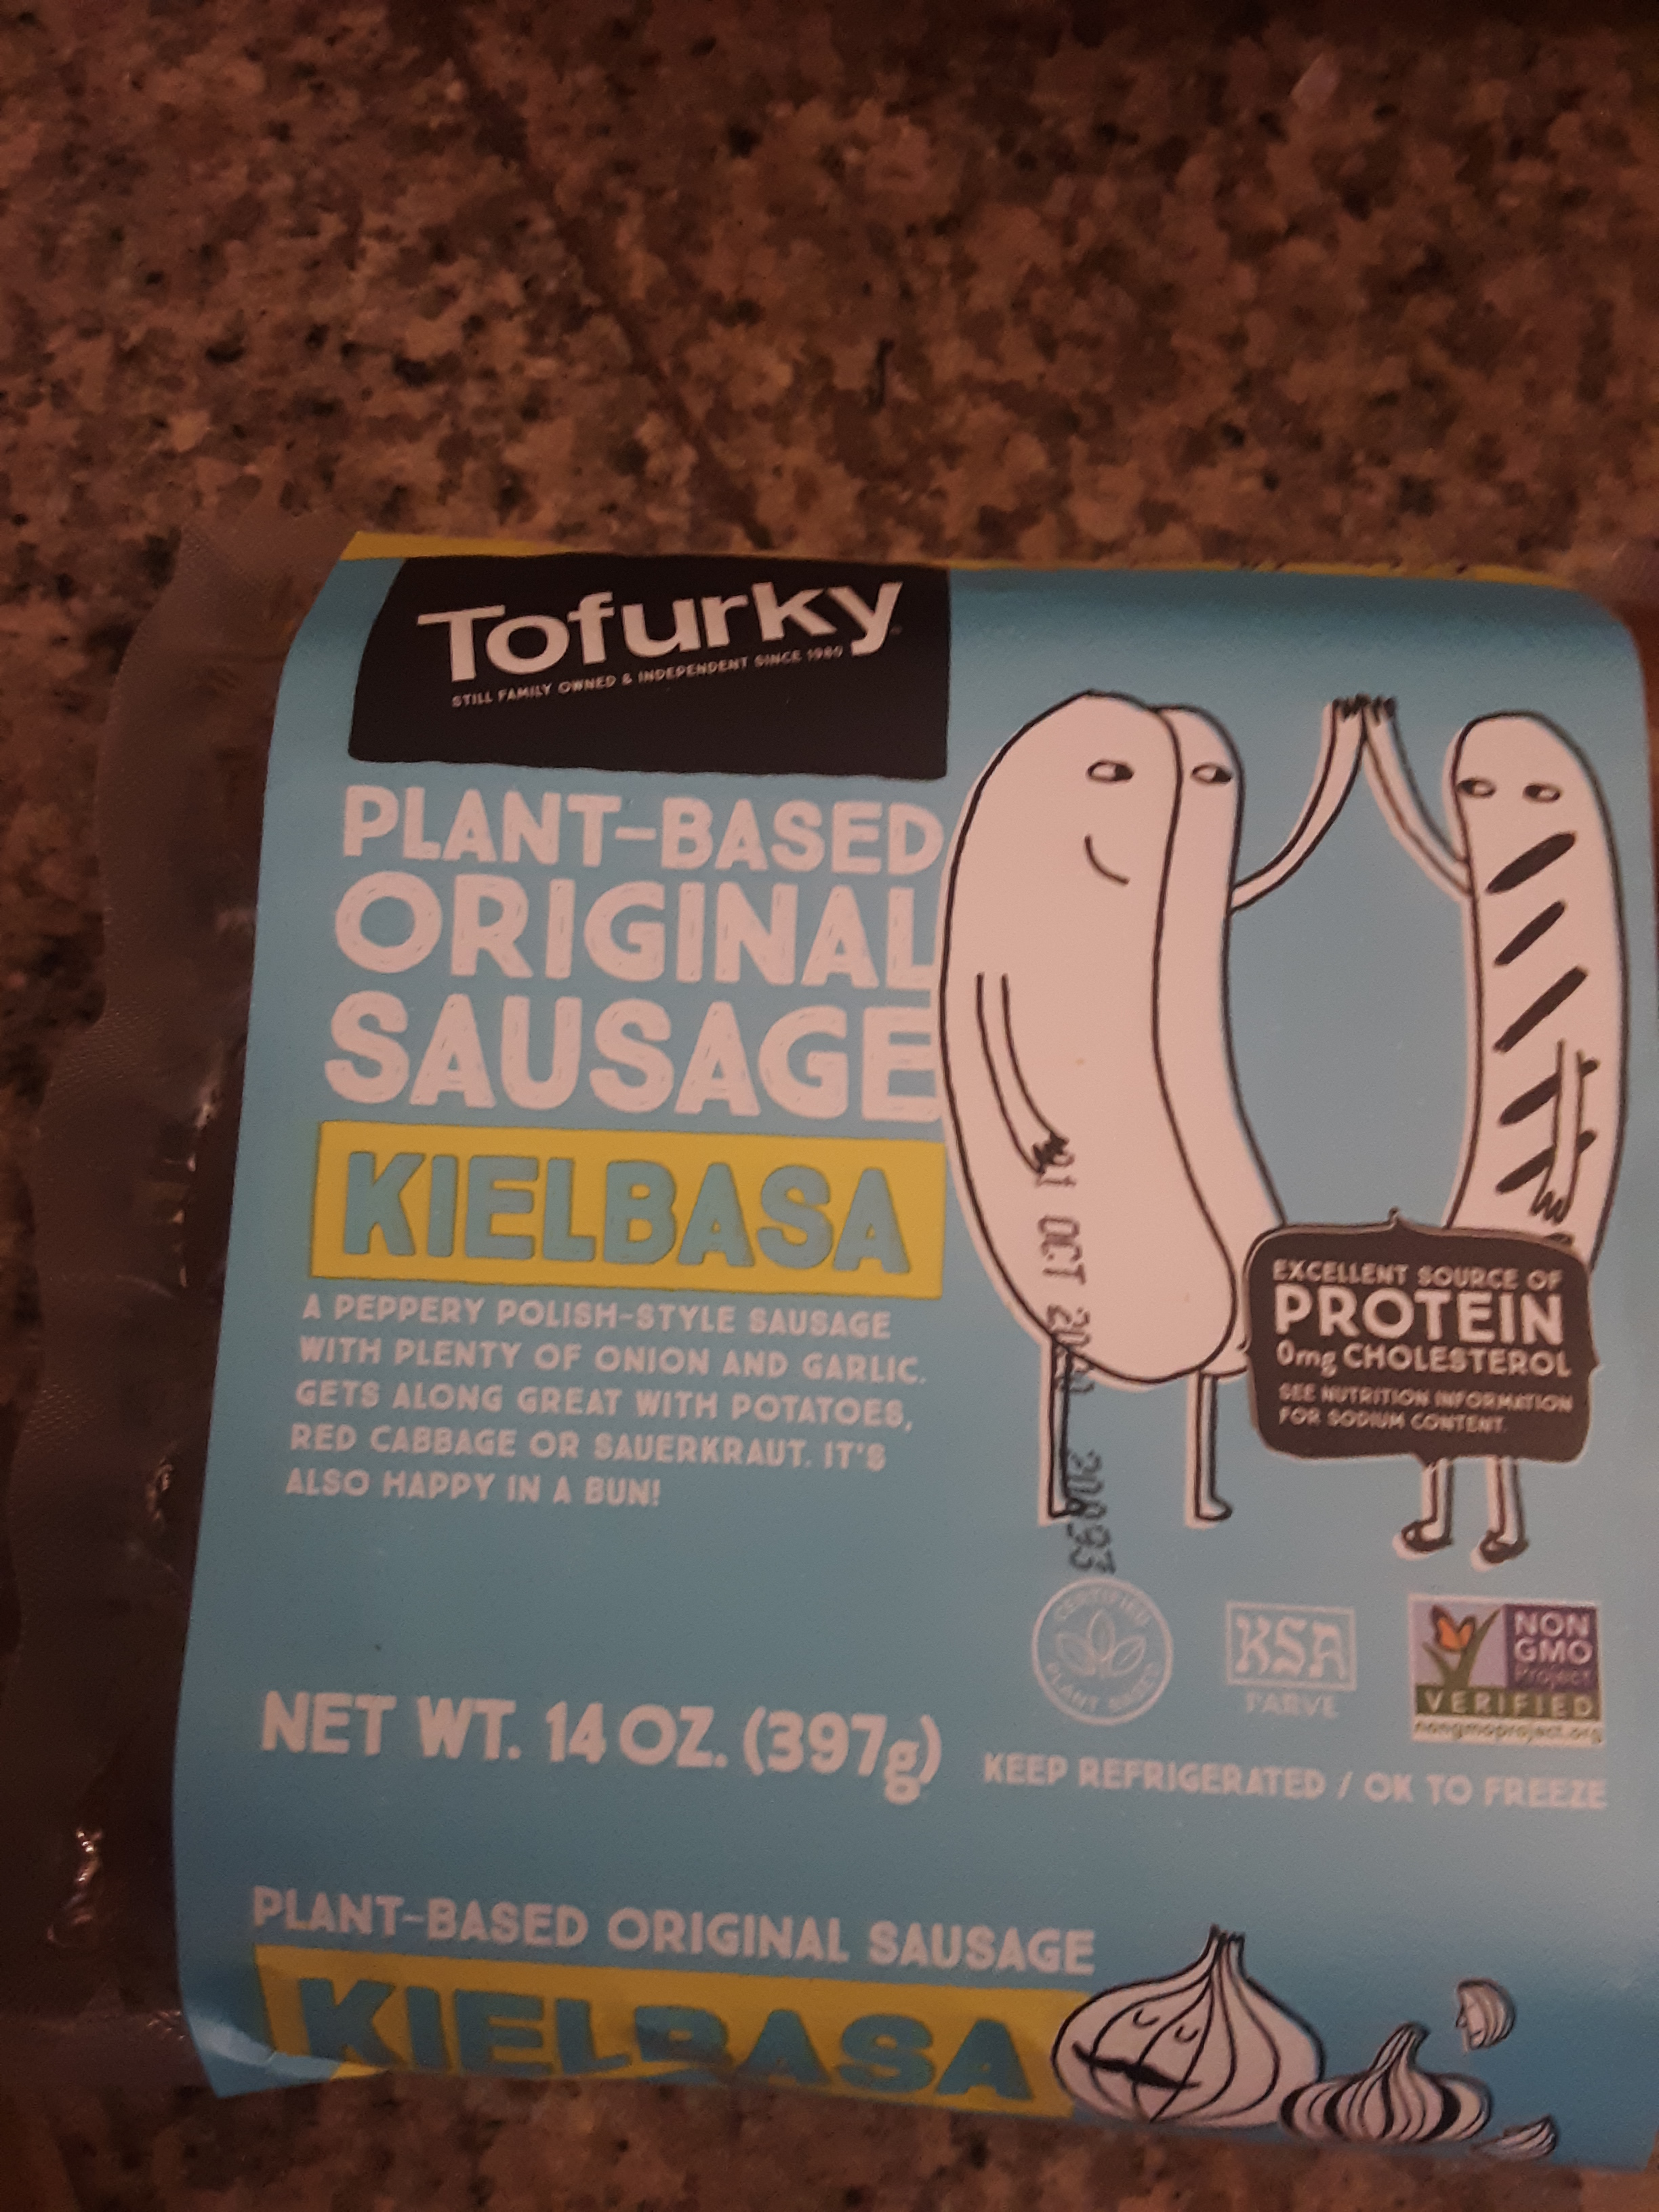 Living well in the 21st century - Limassol, Cyprus - a picture of vegan sausage - tofurky - plant-based original sausage kielbasa - a peppery polish-style sausage with plenty of onion and garlic. Gets along great with potatoes, red cabbage or sauerkraut. It's also happy in a bun! The label is blue with a picture of white buns giving each other a high 5. There is a note that says, "excellent source of protein 0mg cholesterol - see nutrition information for sodium content. Net wt. 14 oz. (397g) keep refrigerated / ok to freeze 